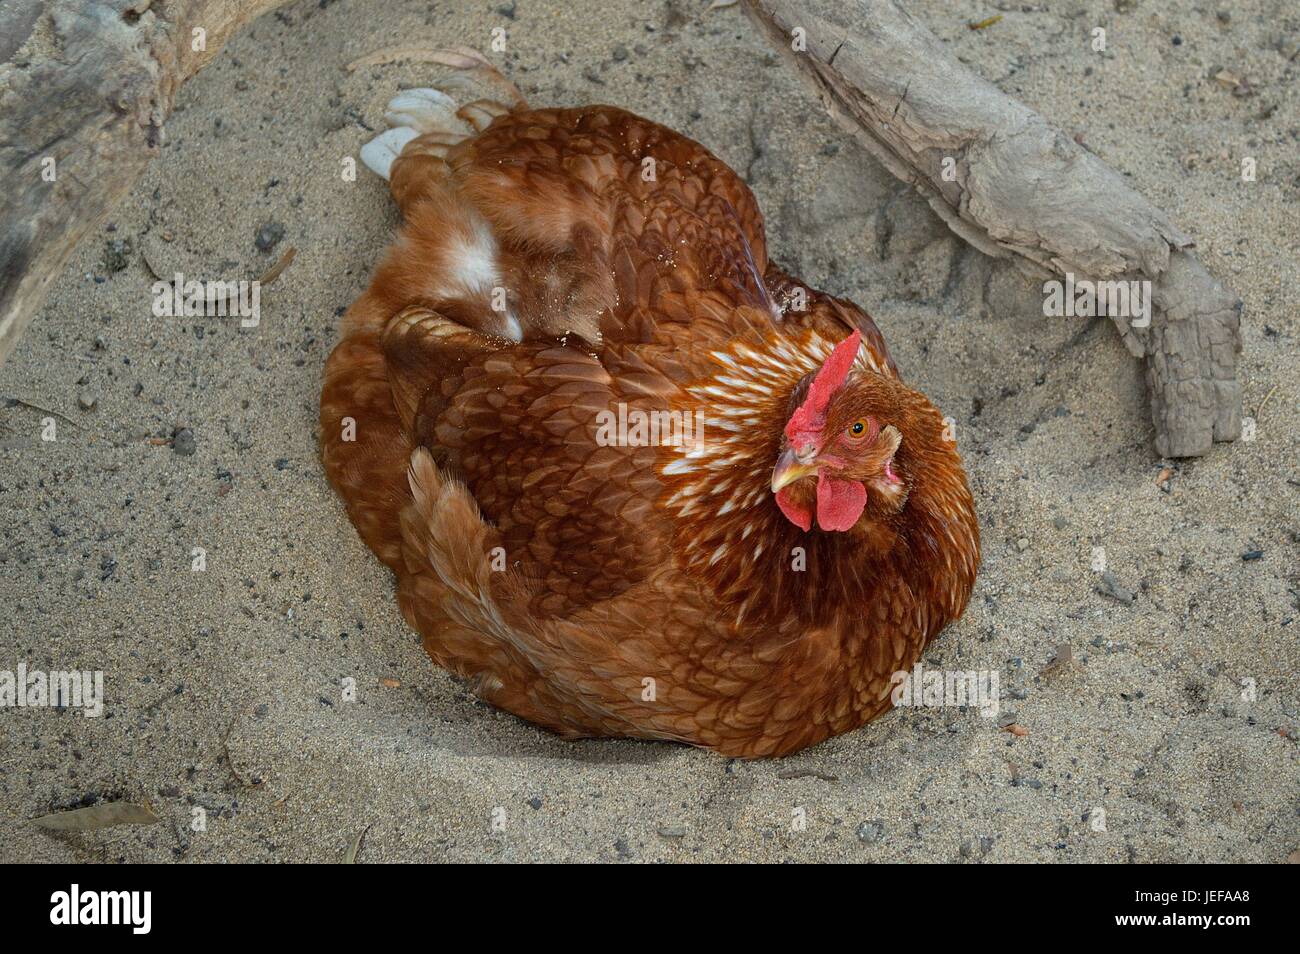 Hyline brown hen relaxing Stock Photo